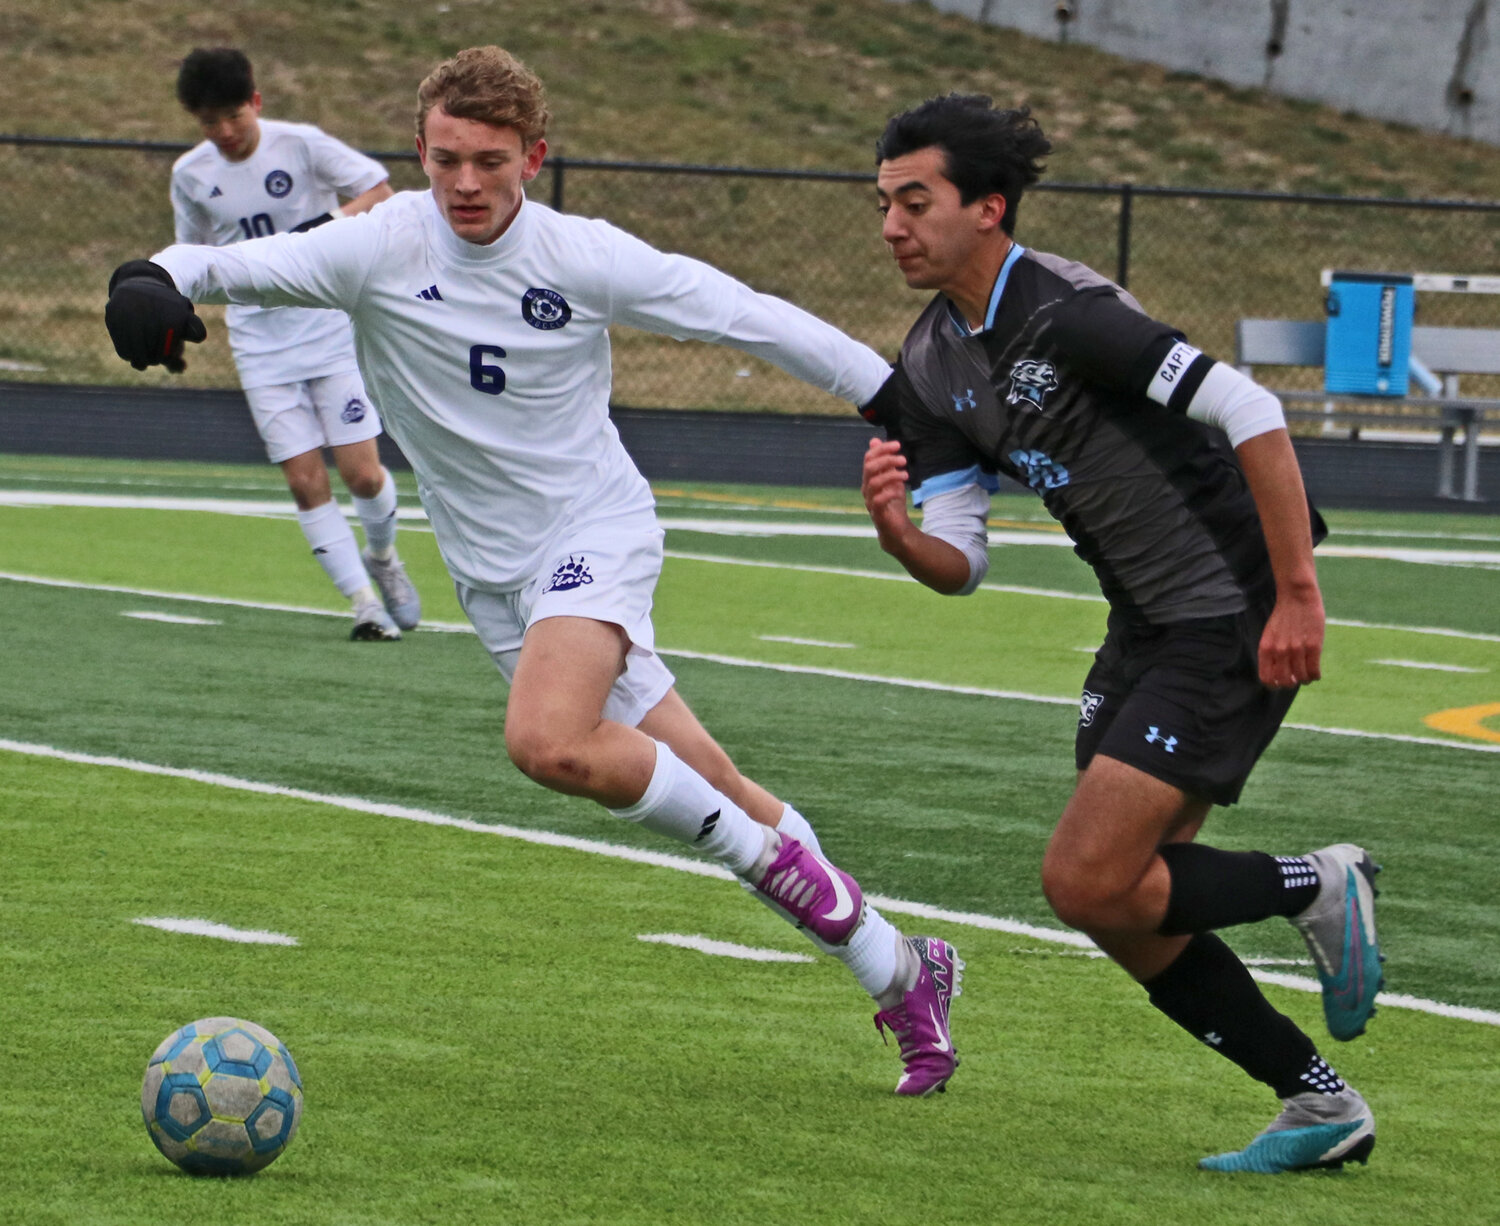 Blair's Alex Just, left, gives chase as the Wolves' Luke Grigsby dribbles upfield Monday at Elkhorn North. The No. 6 Wolves beat the Bears, 5-0, in the cold.